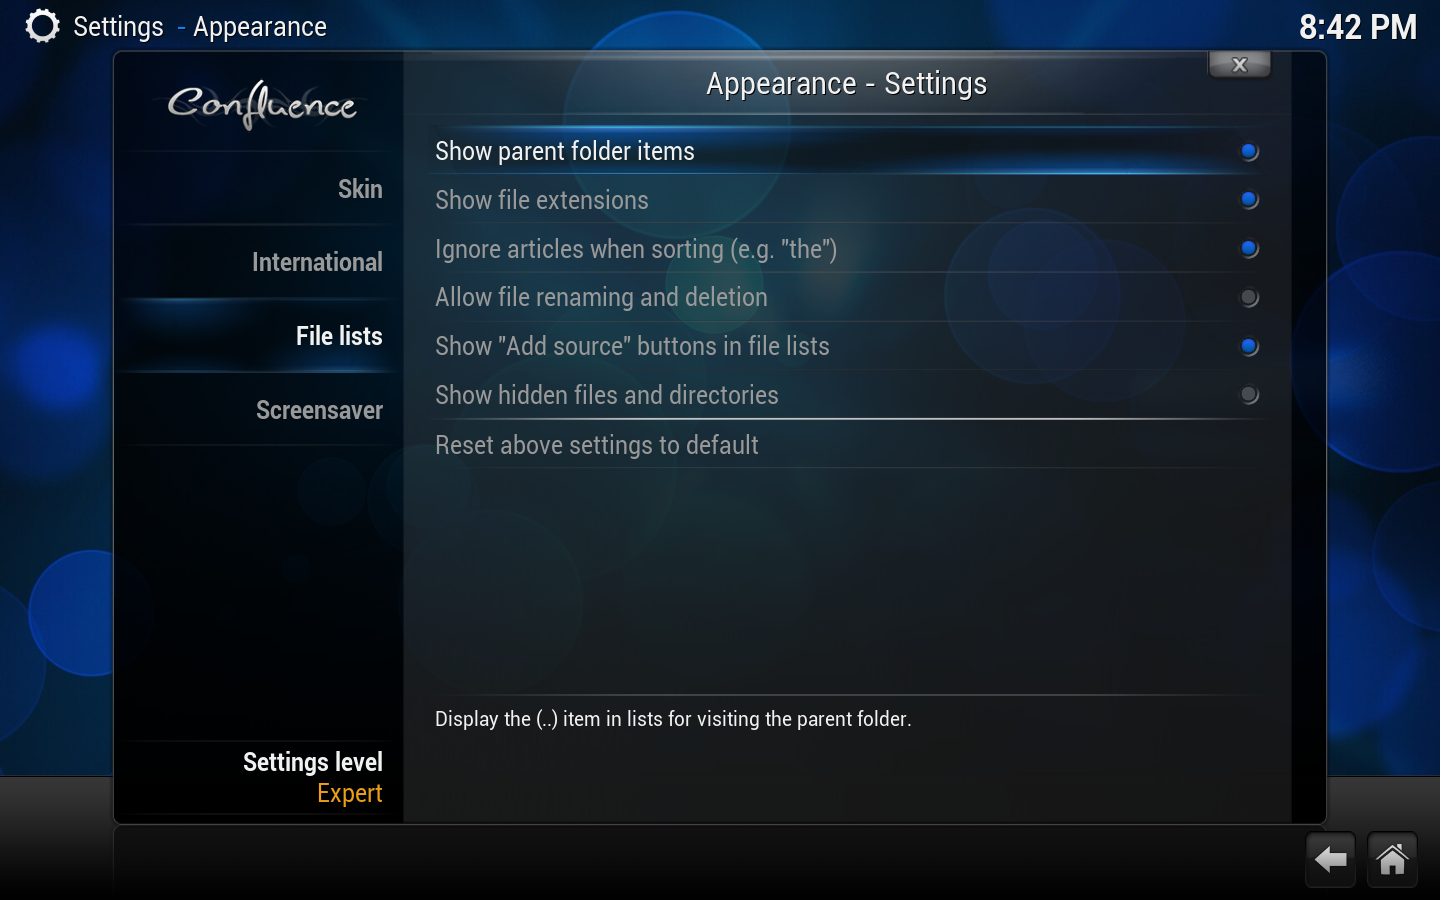 File:Settings.appearance.file lists.png